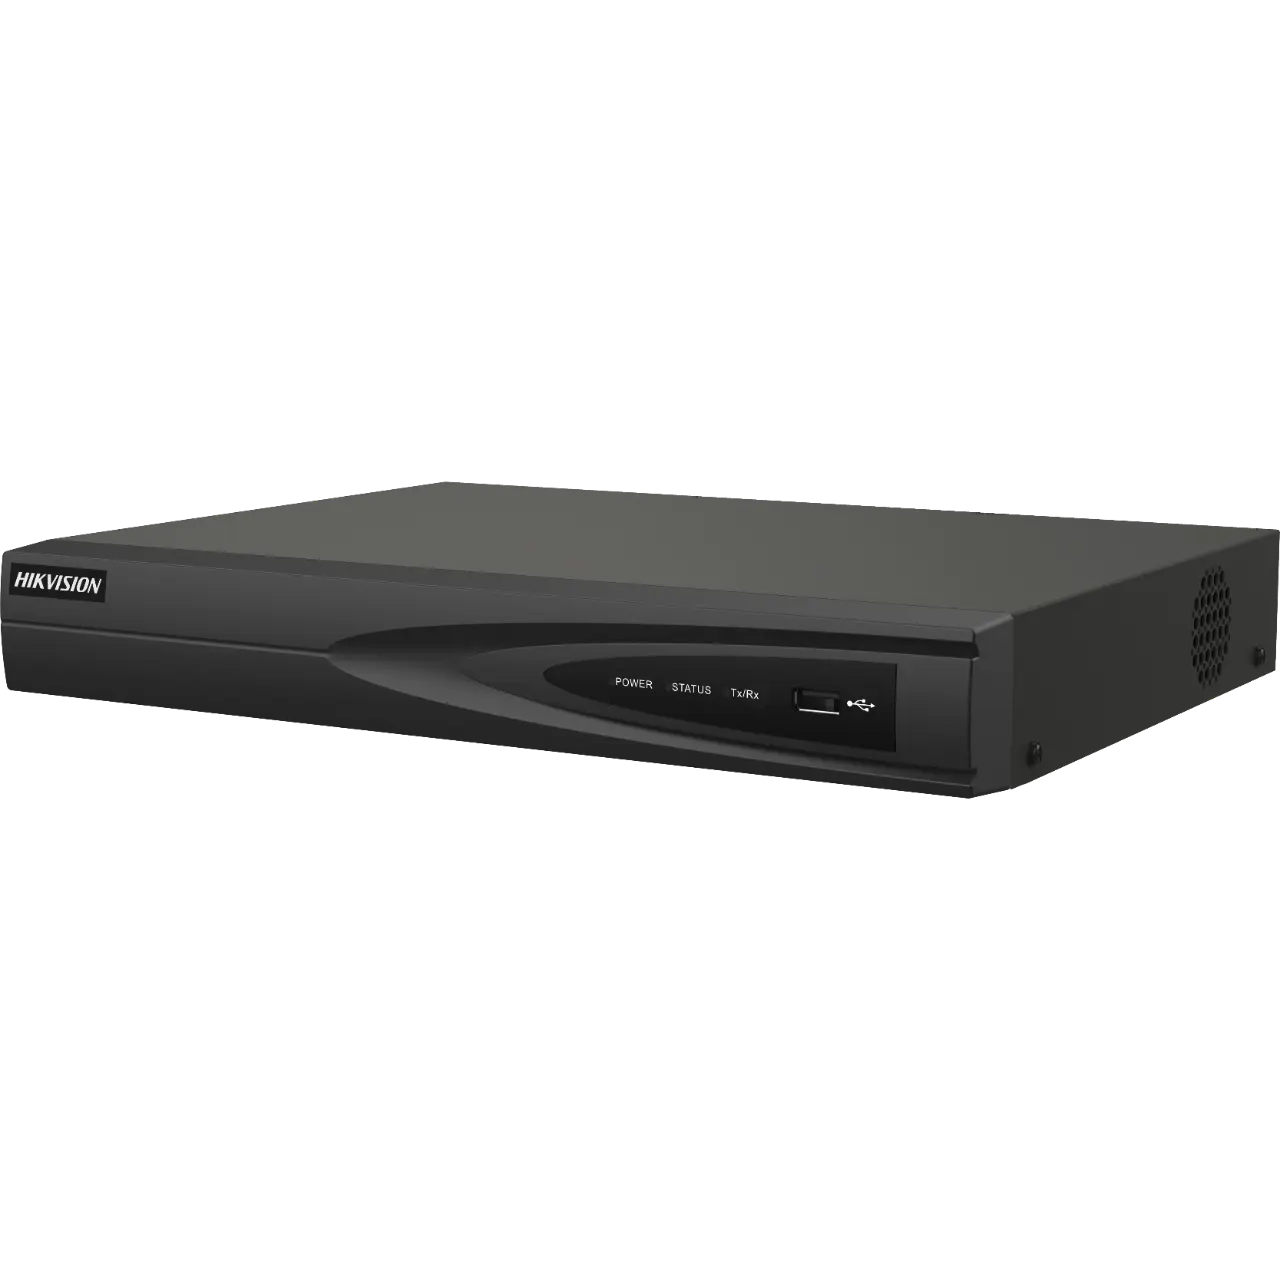 Hikvision DS-7616NI-Q1 NVR Network Video Recorder, H.265+/H.265/H.264+/H.264 Video Formats, 16-ch IP Camera Inputs, 160 Mbps Bandwidth, Affordable Price